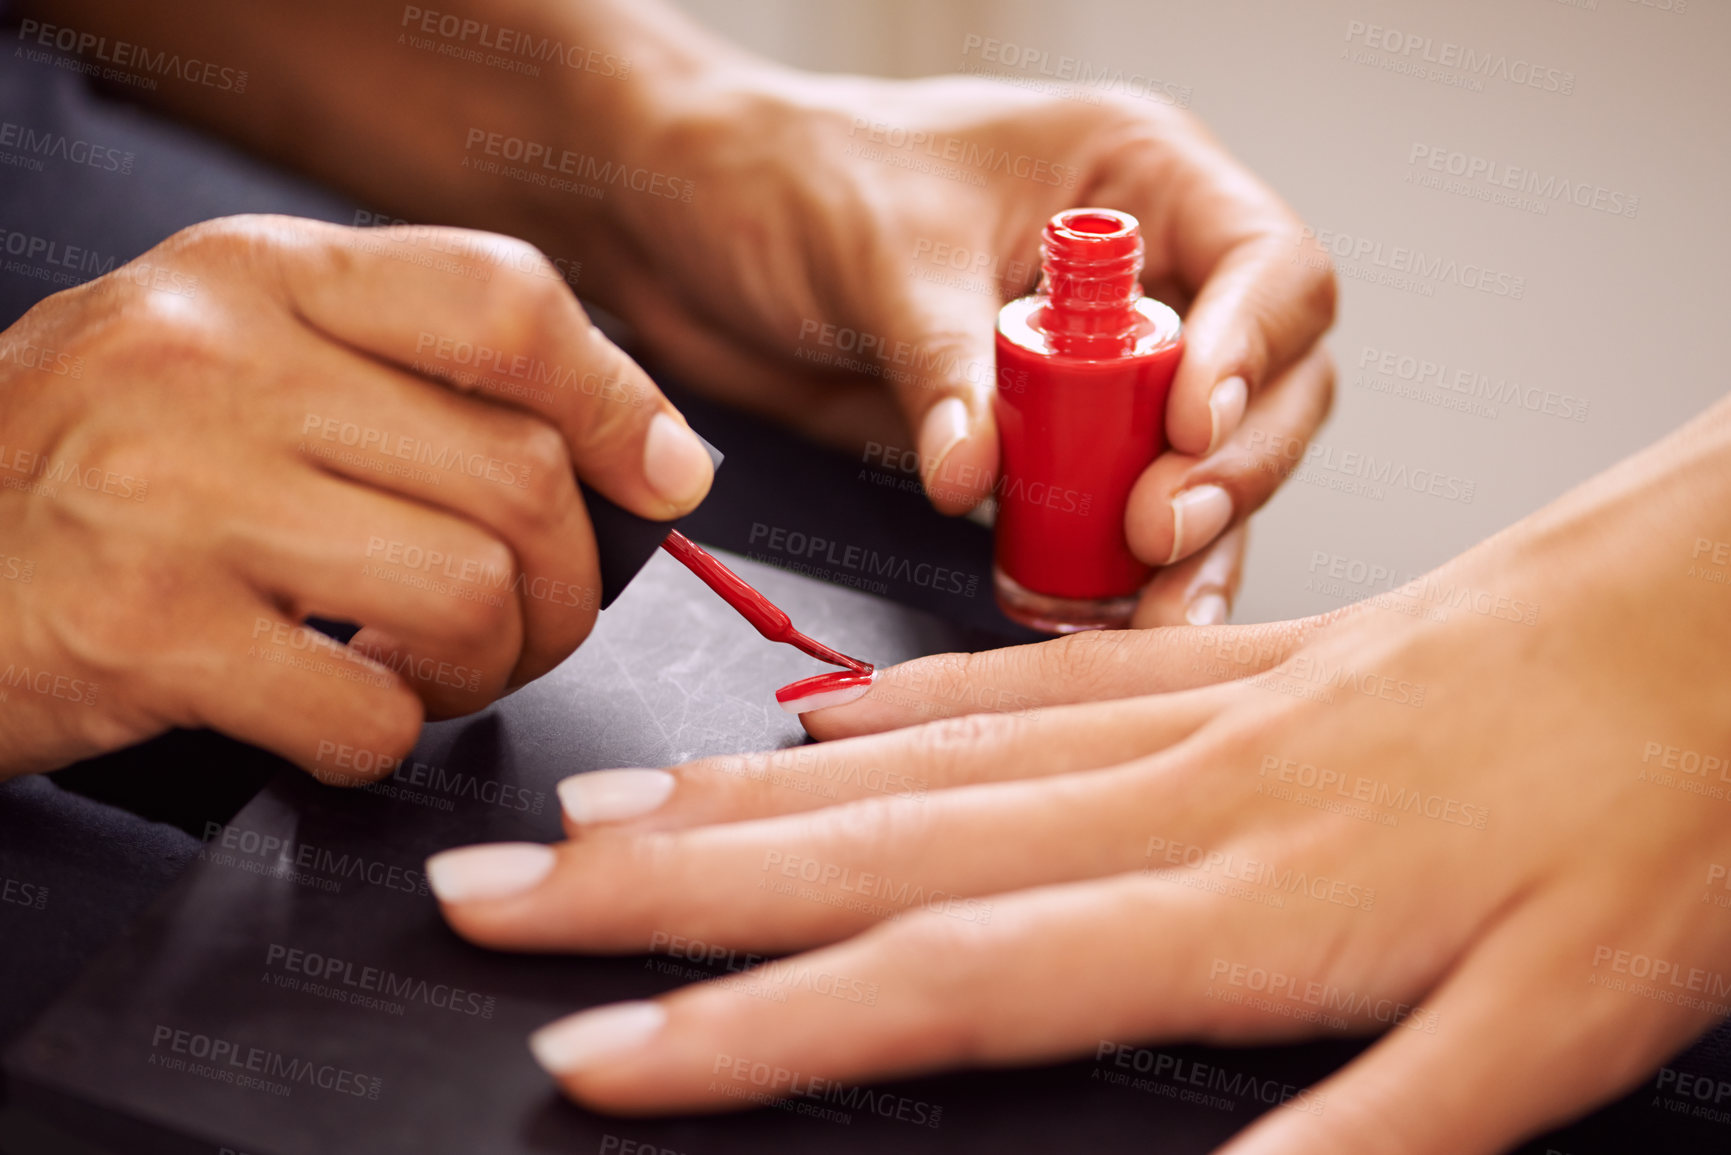 Buy stock photo Nail polish, manicure and hands of woman with red color for salon treatment, cosmetics and pamper. Luxury spa, beautician and person painting nails for grooming service, beauty aesthetic and wellness